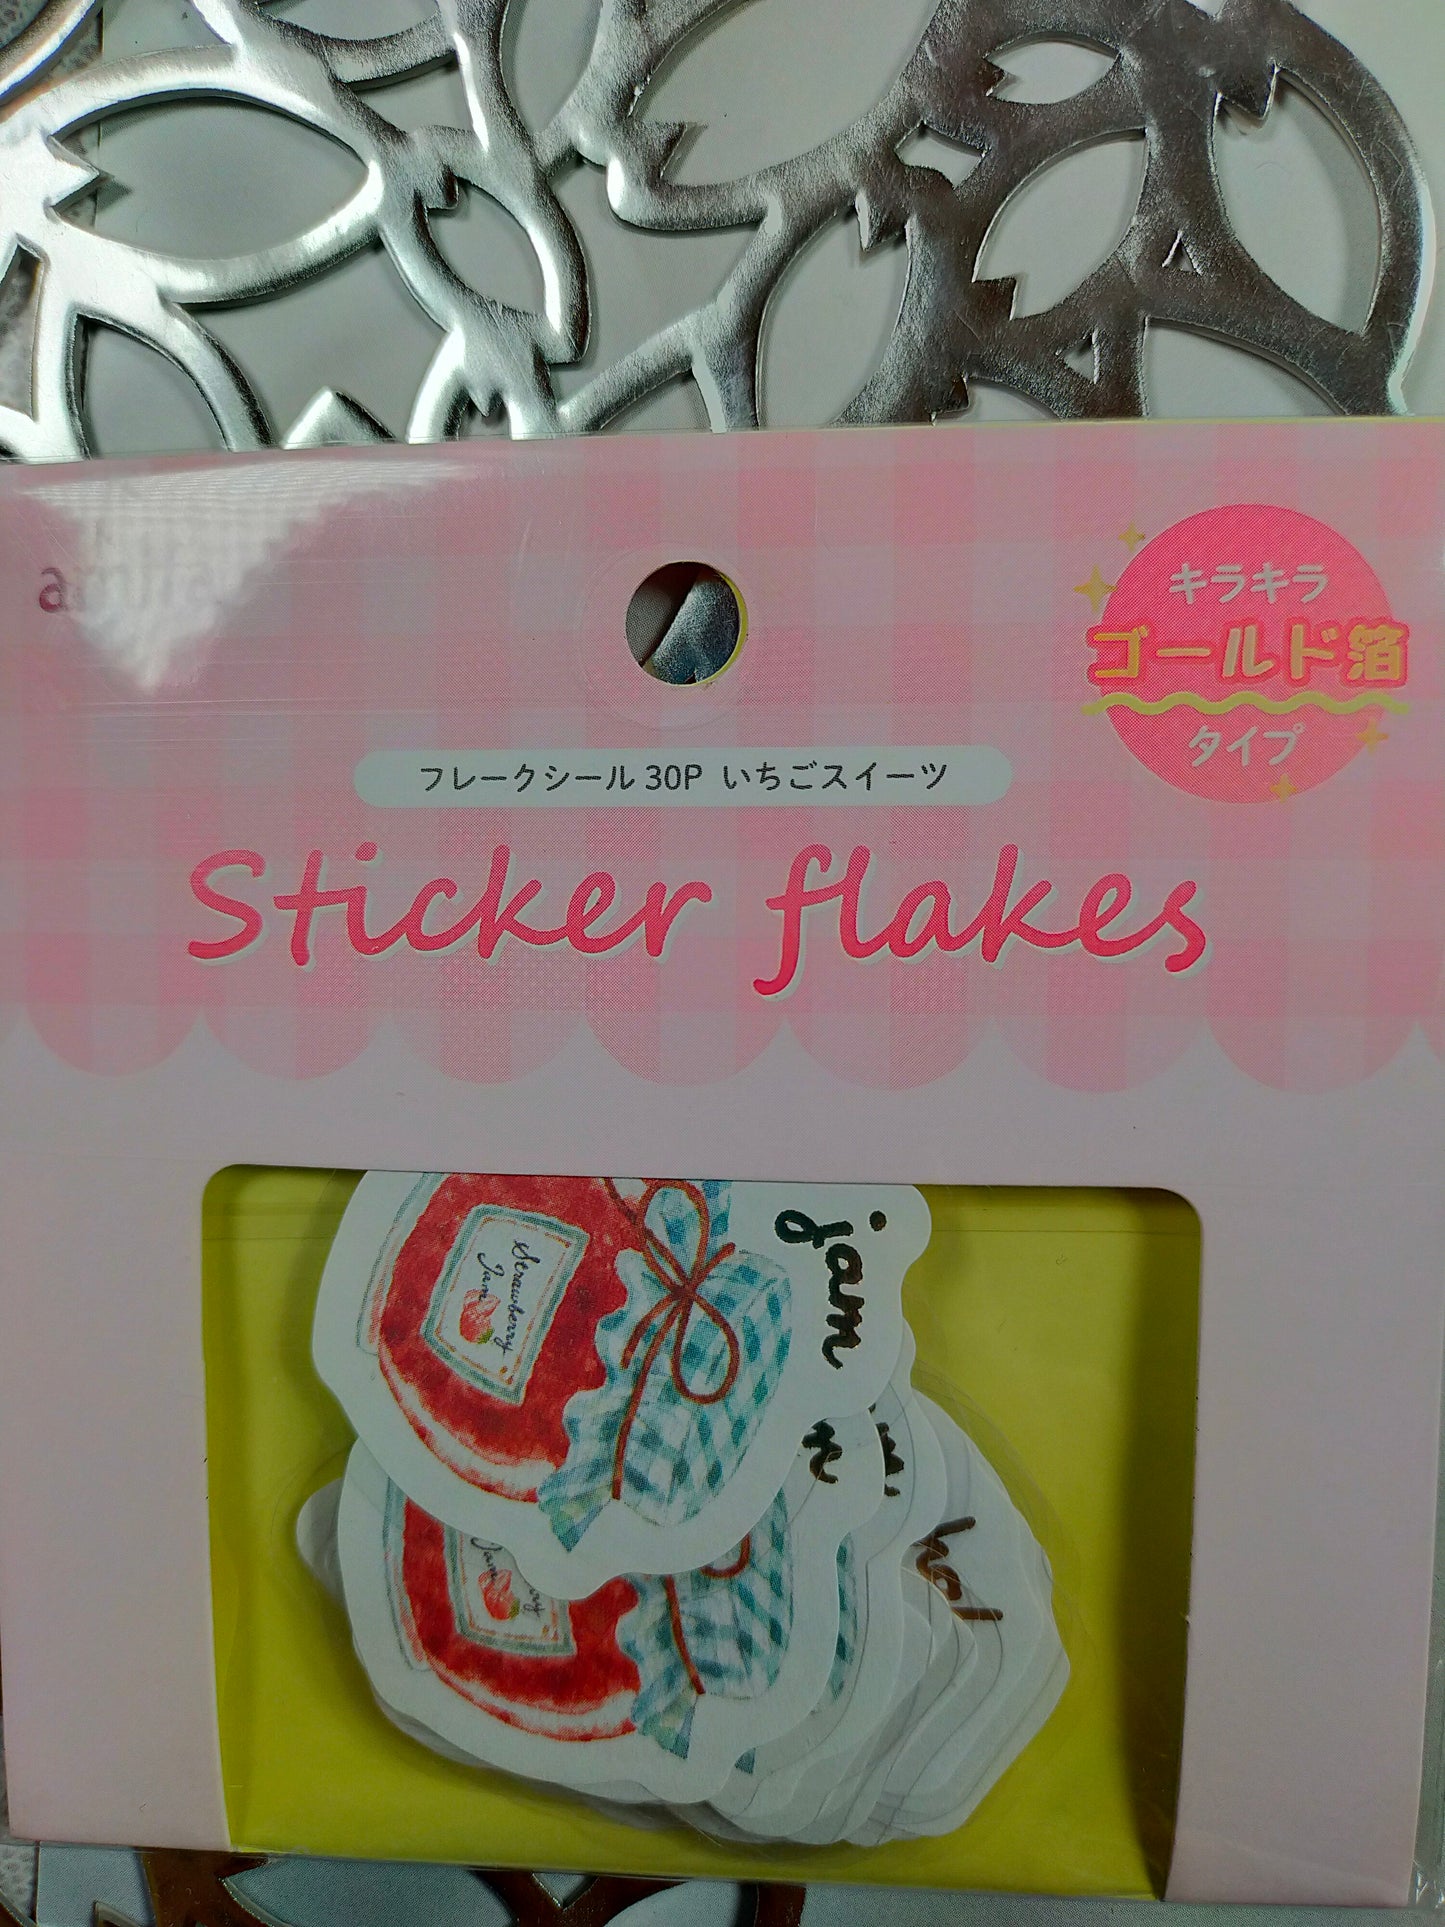 STICKER FLAKES Sweet and food 10designs*3pieces, amifa_ Retro Shop / Chocolate / Strawberry sweets